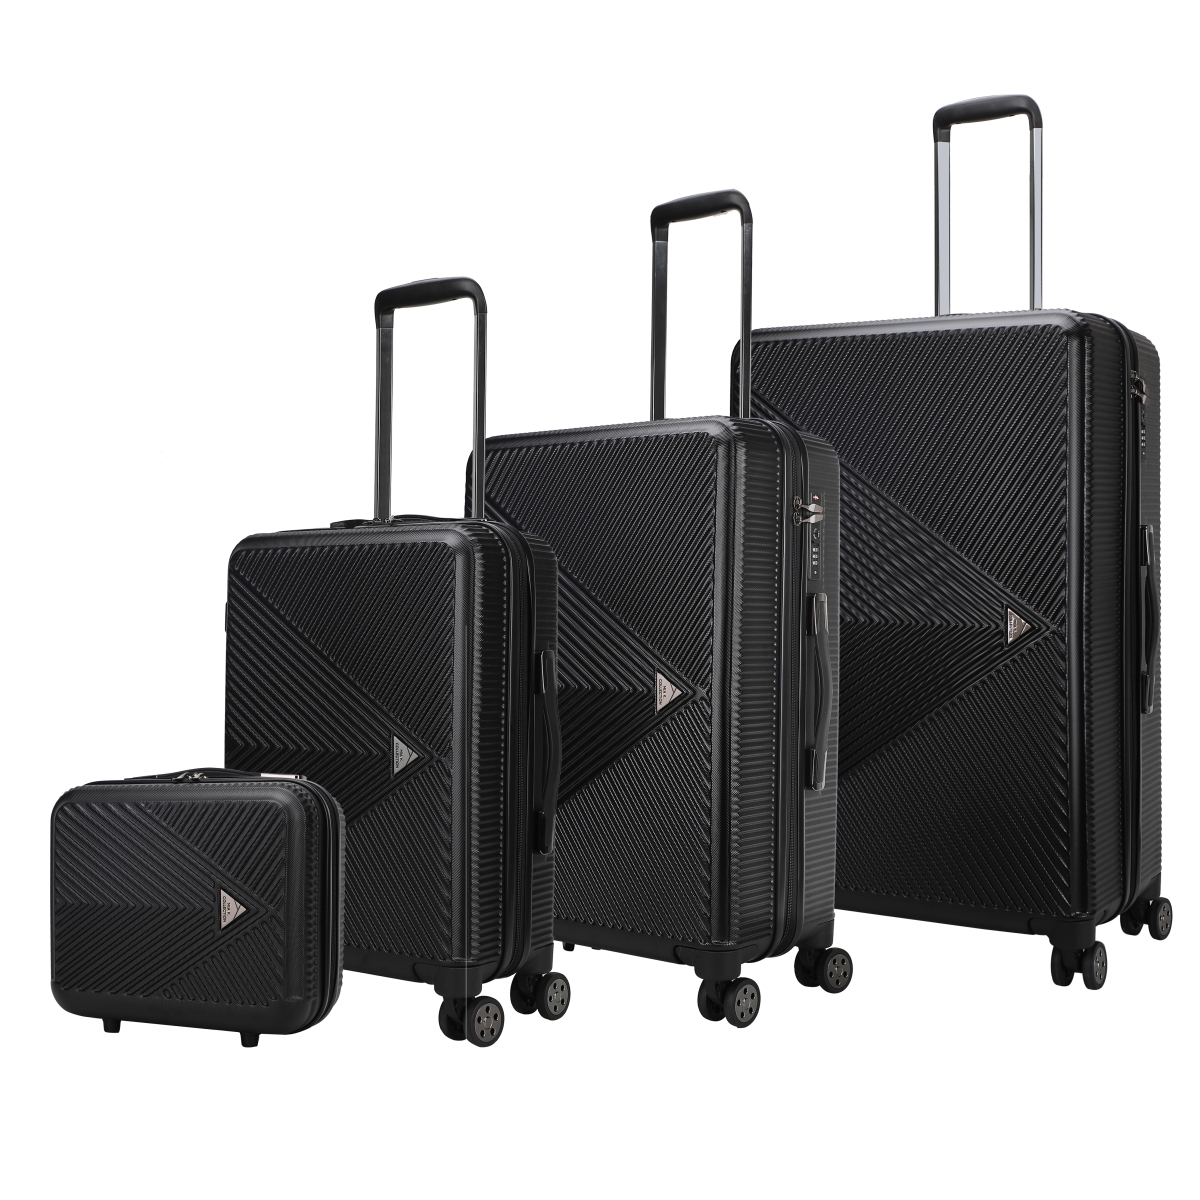 Picture of MKF Collection by Mia K. MKF-F204BK-4 Felicity Luggage Set by Mia K- 4-piece set